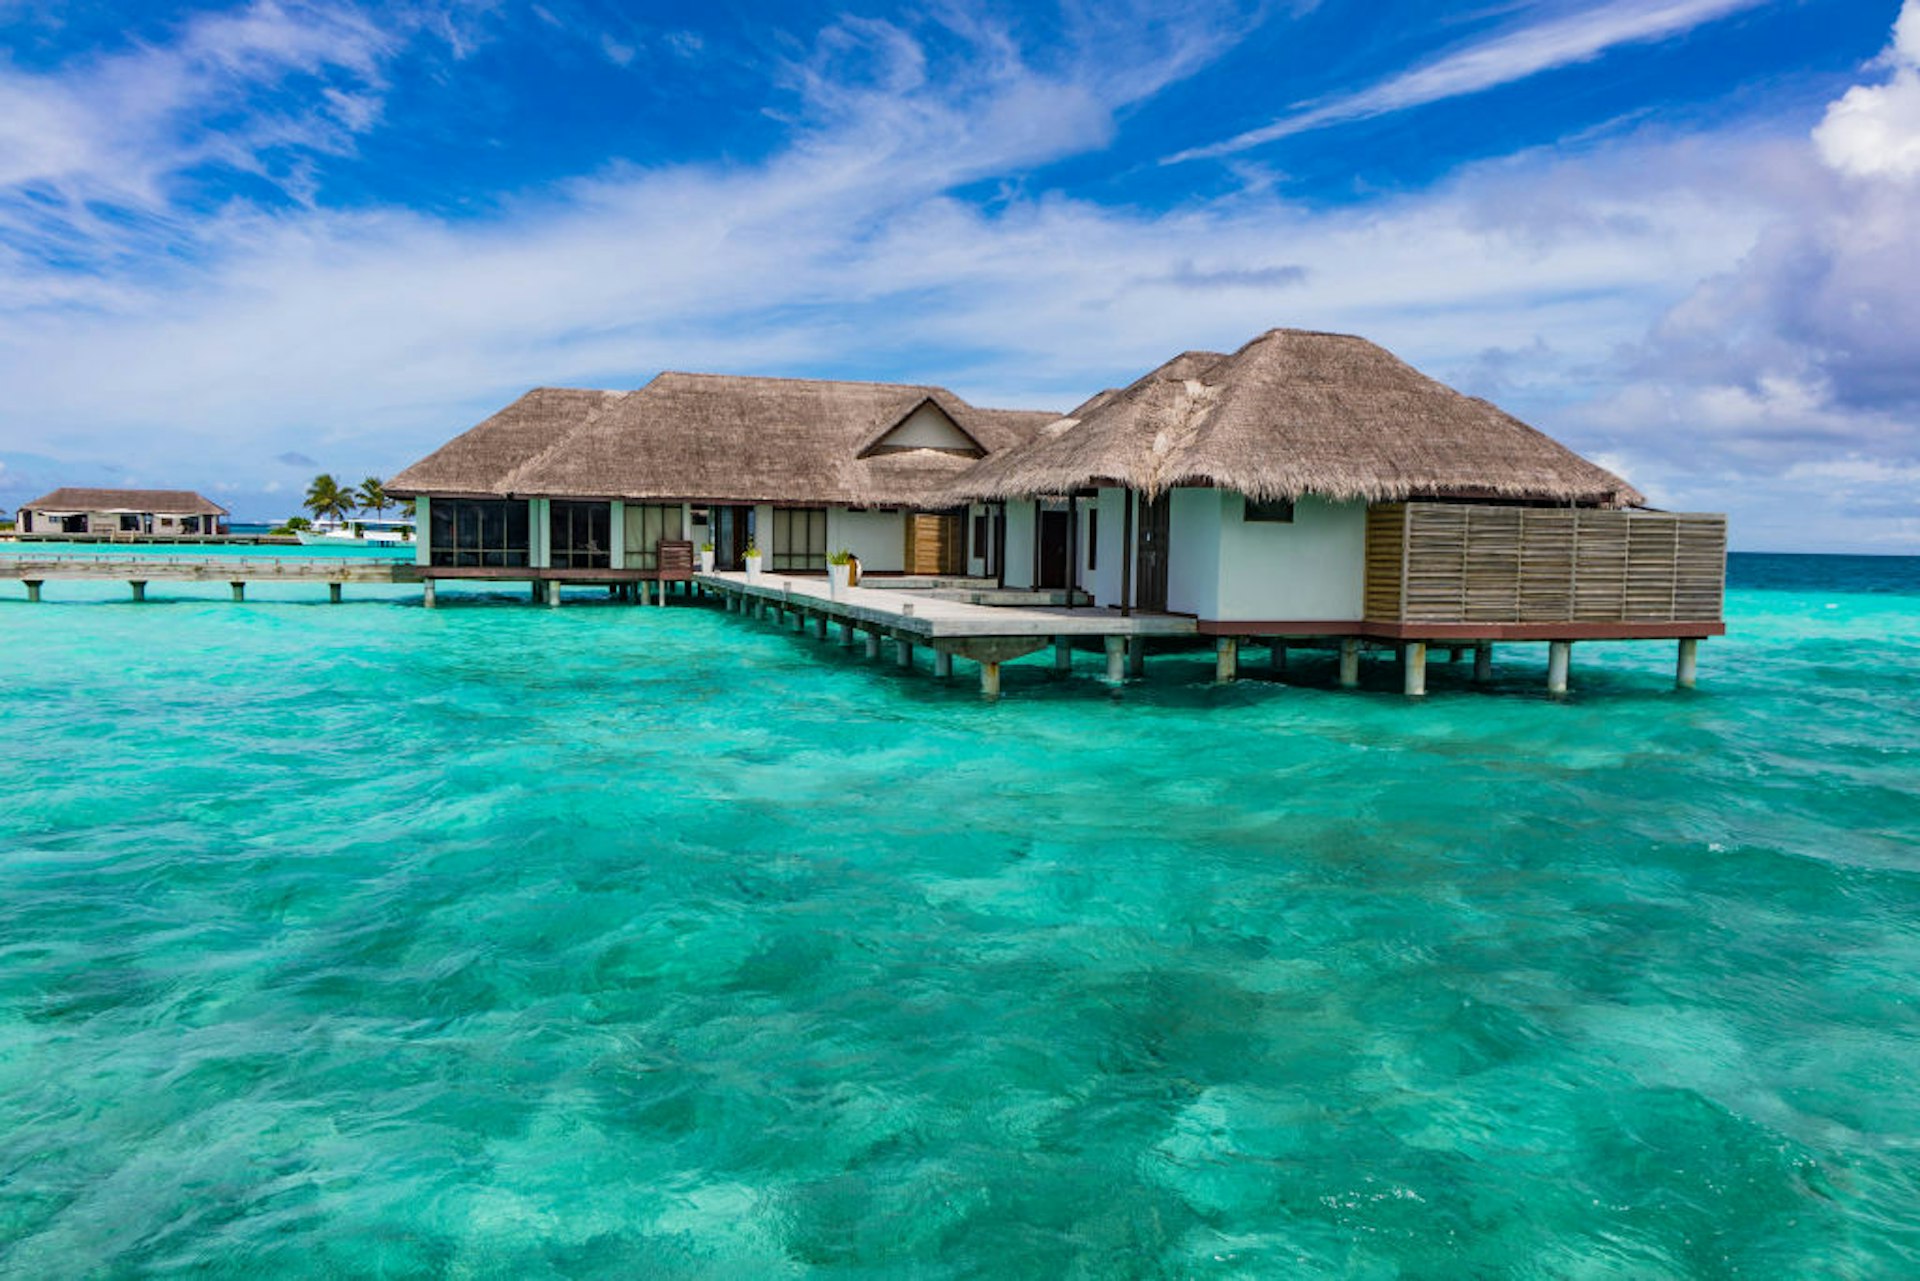 Overwater bungalows in Velassaru Resort in the Maldives. Brown-thatch and white-walled cottages sit atop clear turquoise water.